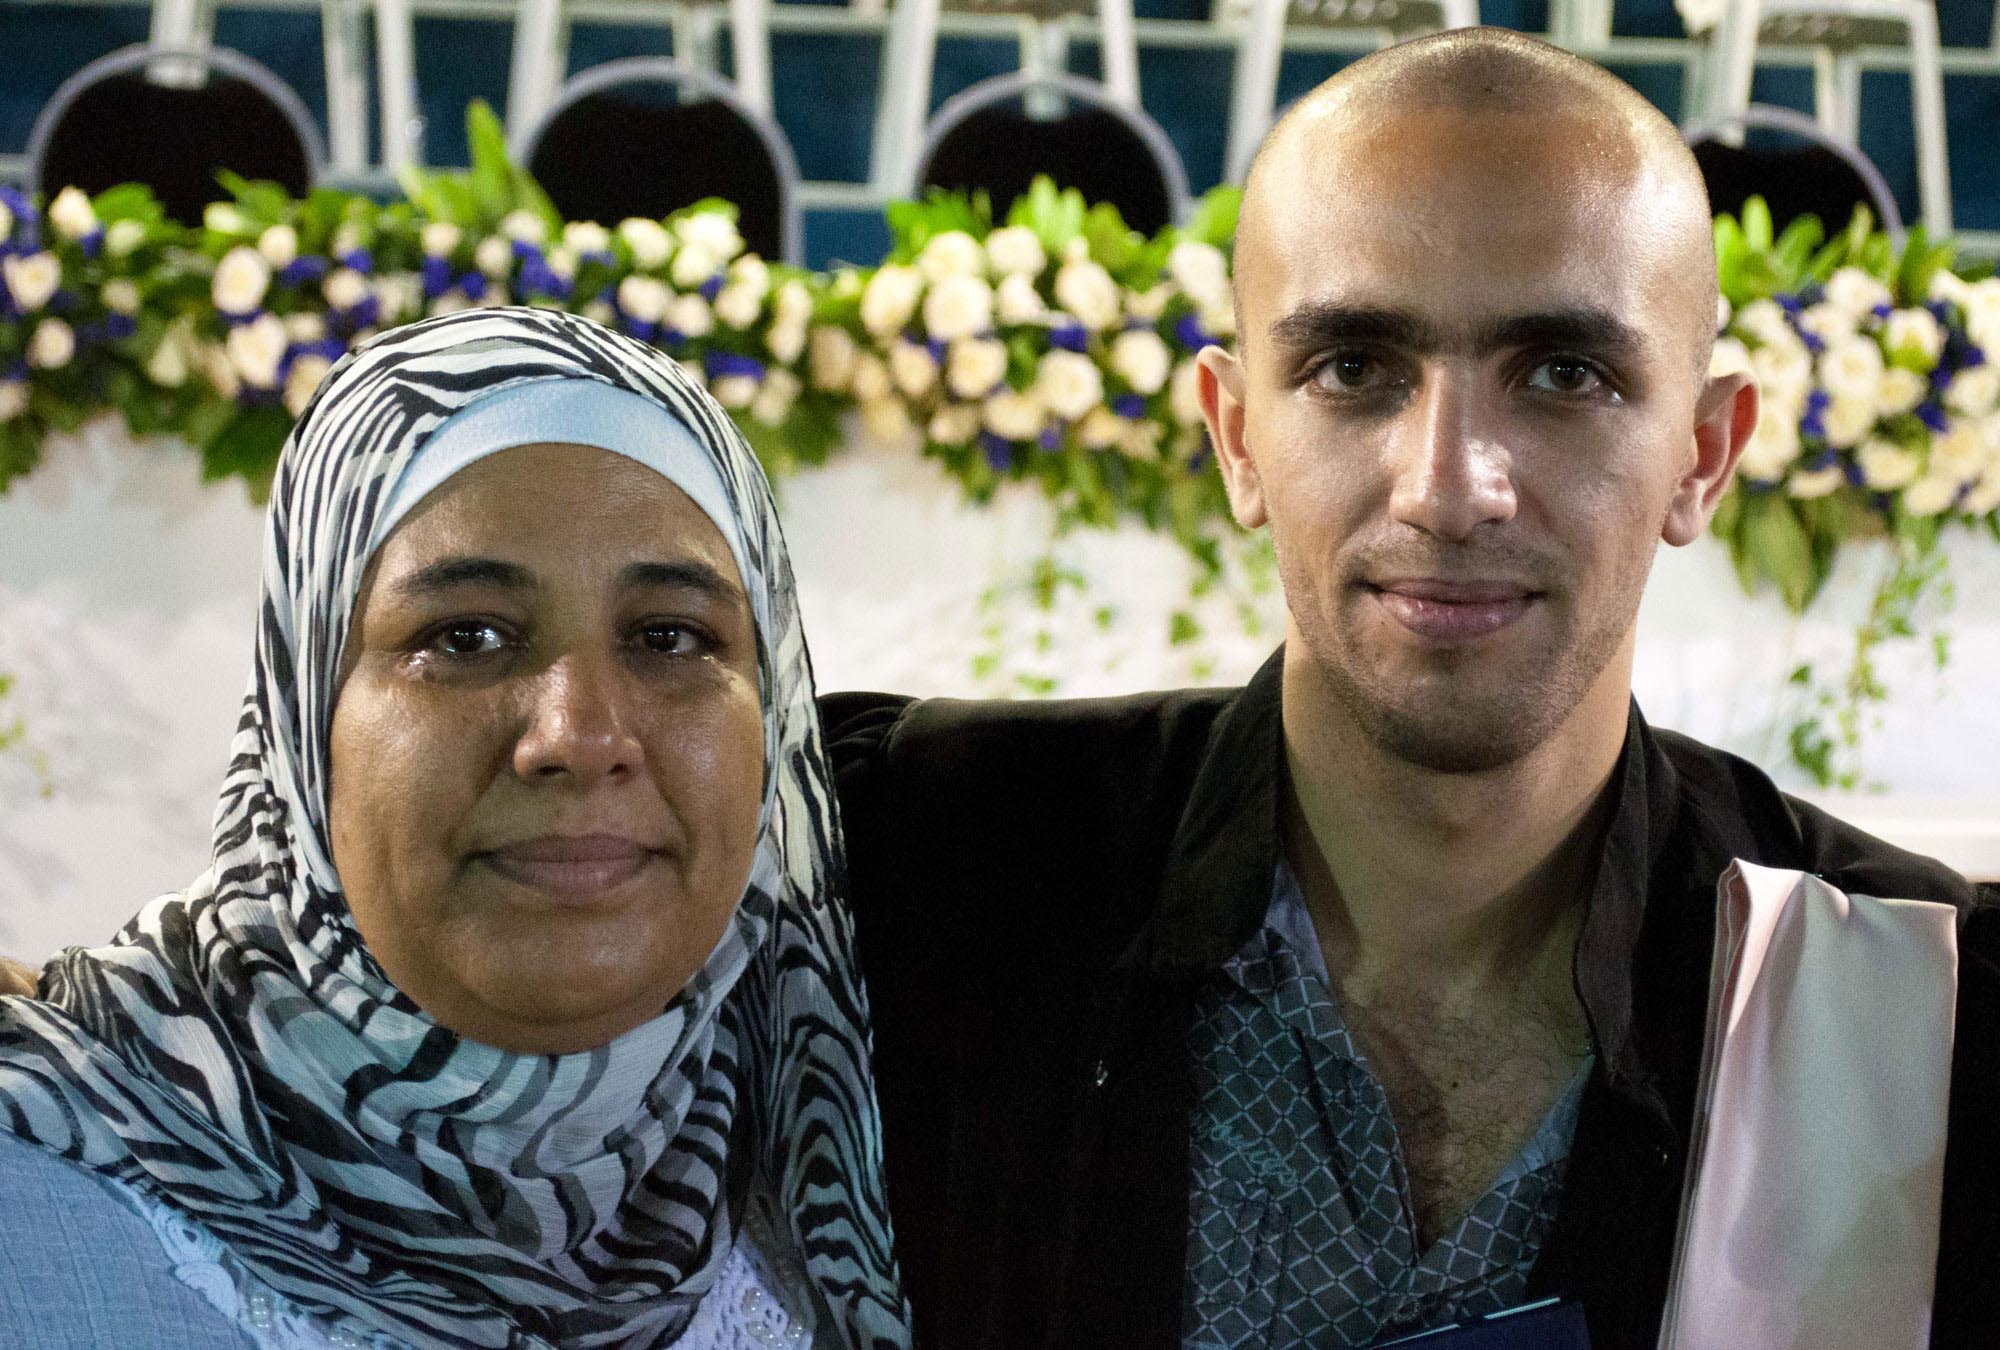 Mohammad with his mother at his graduation from technical school. Anera sponsored his studies.